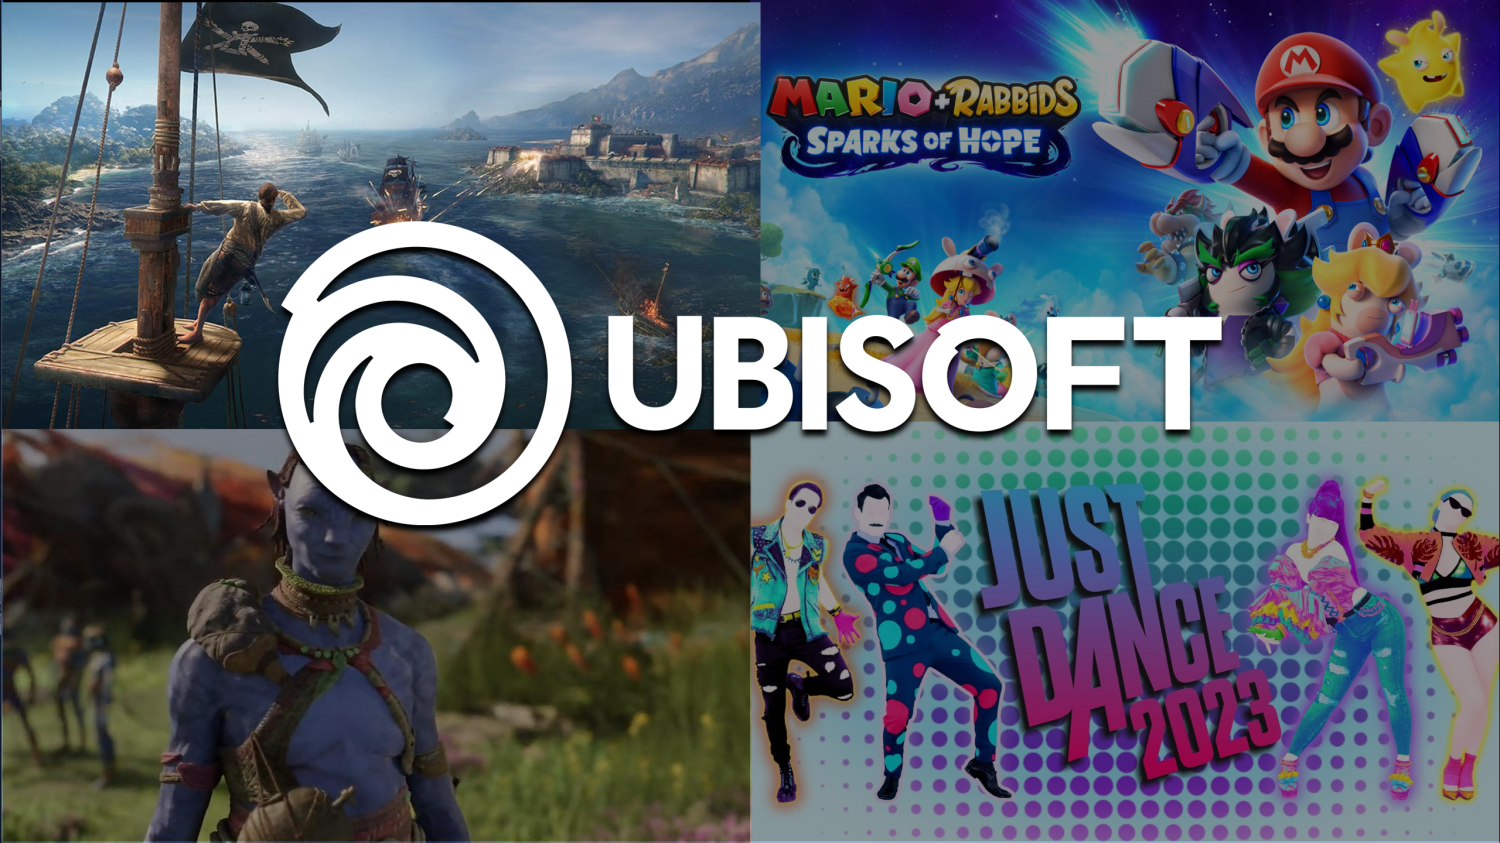 French Video Game Maker Ubisoft Increases Writedowns and Lowers Targets